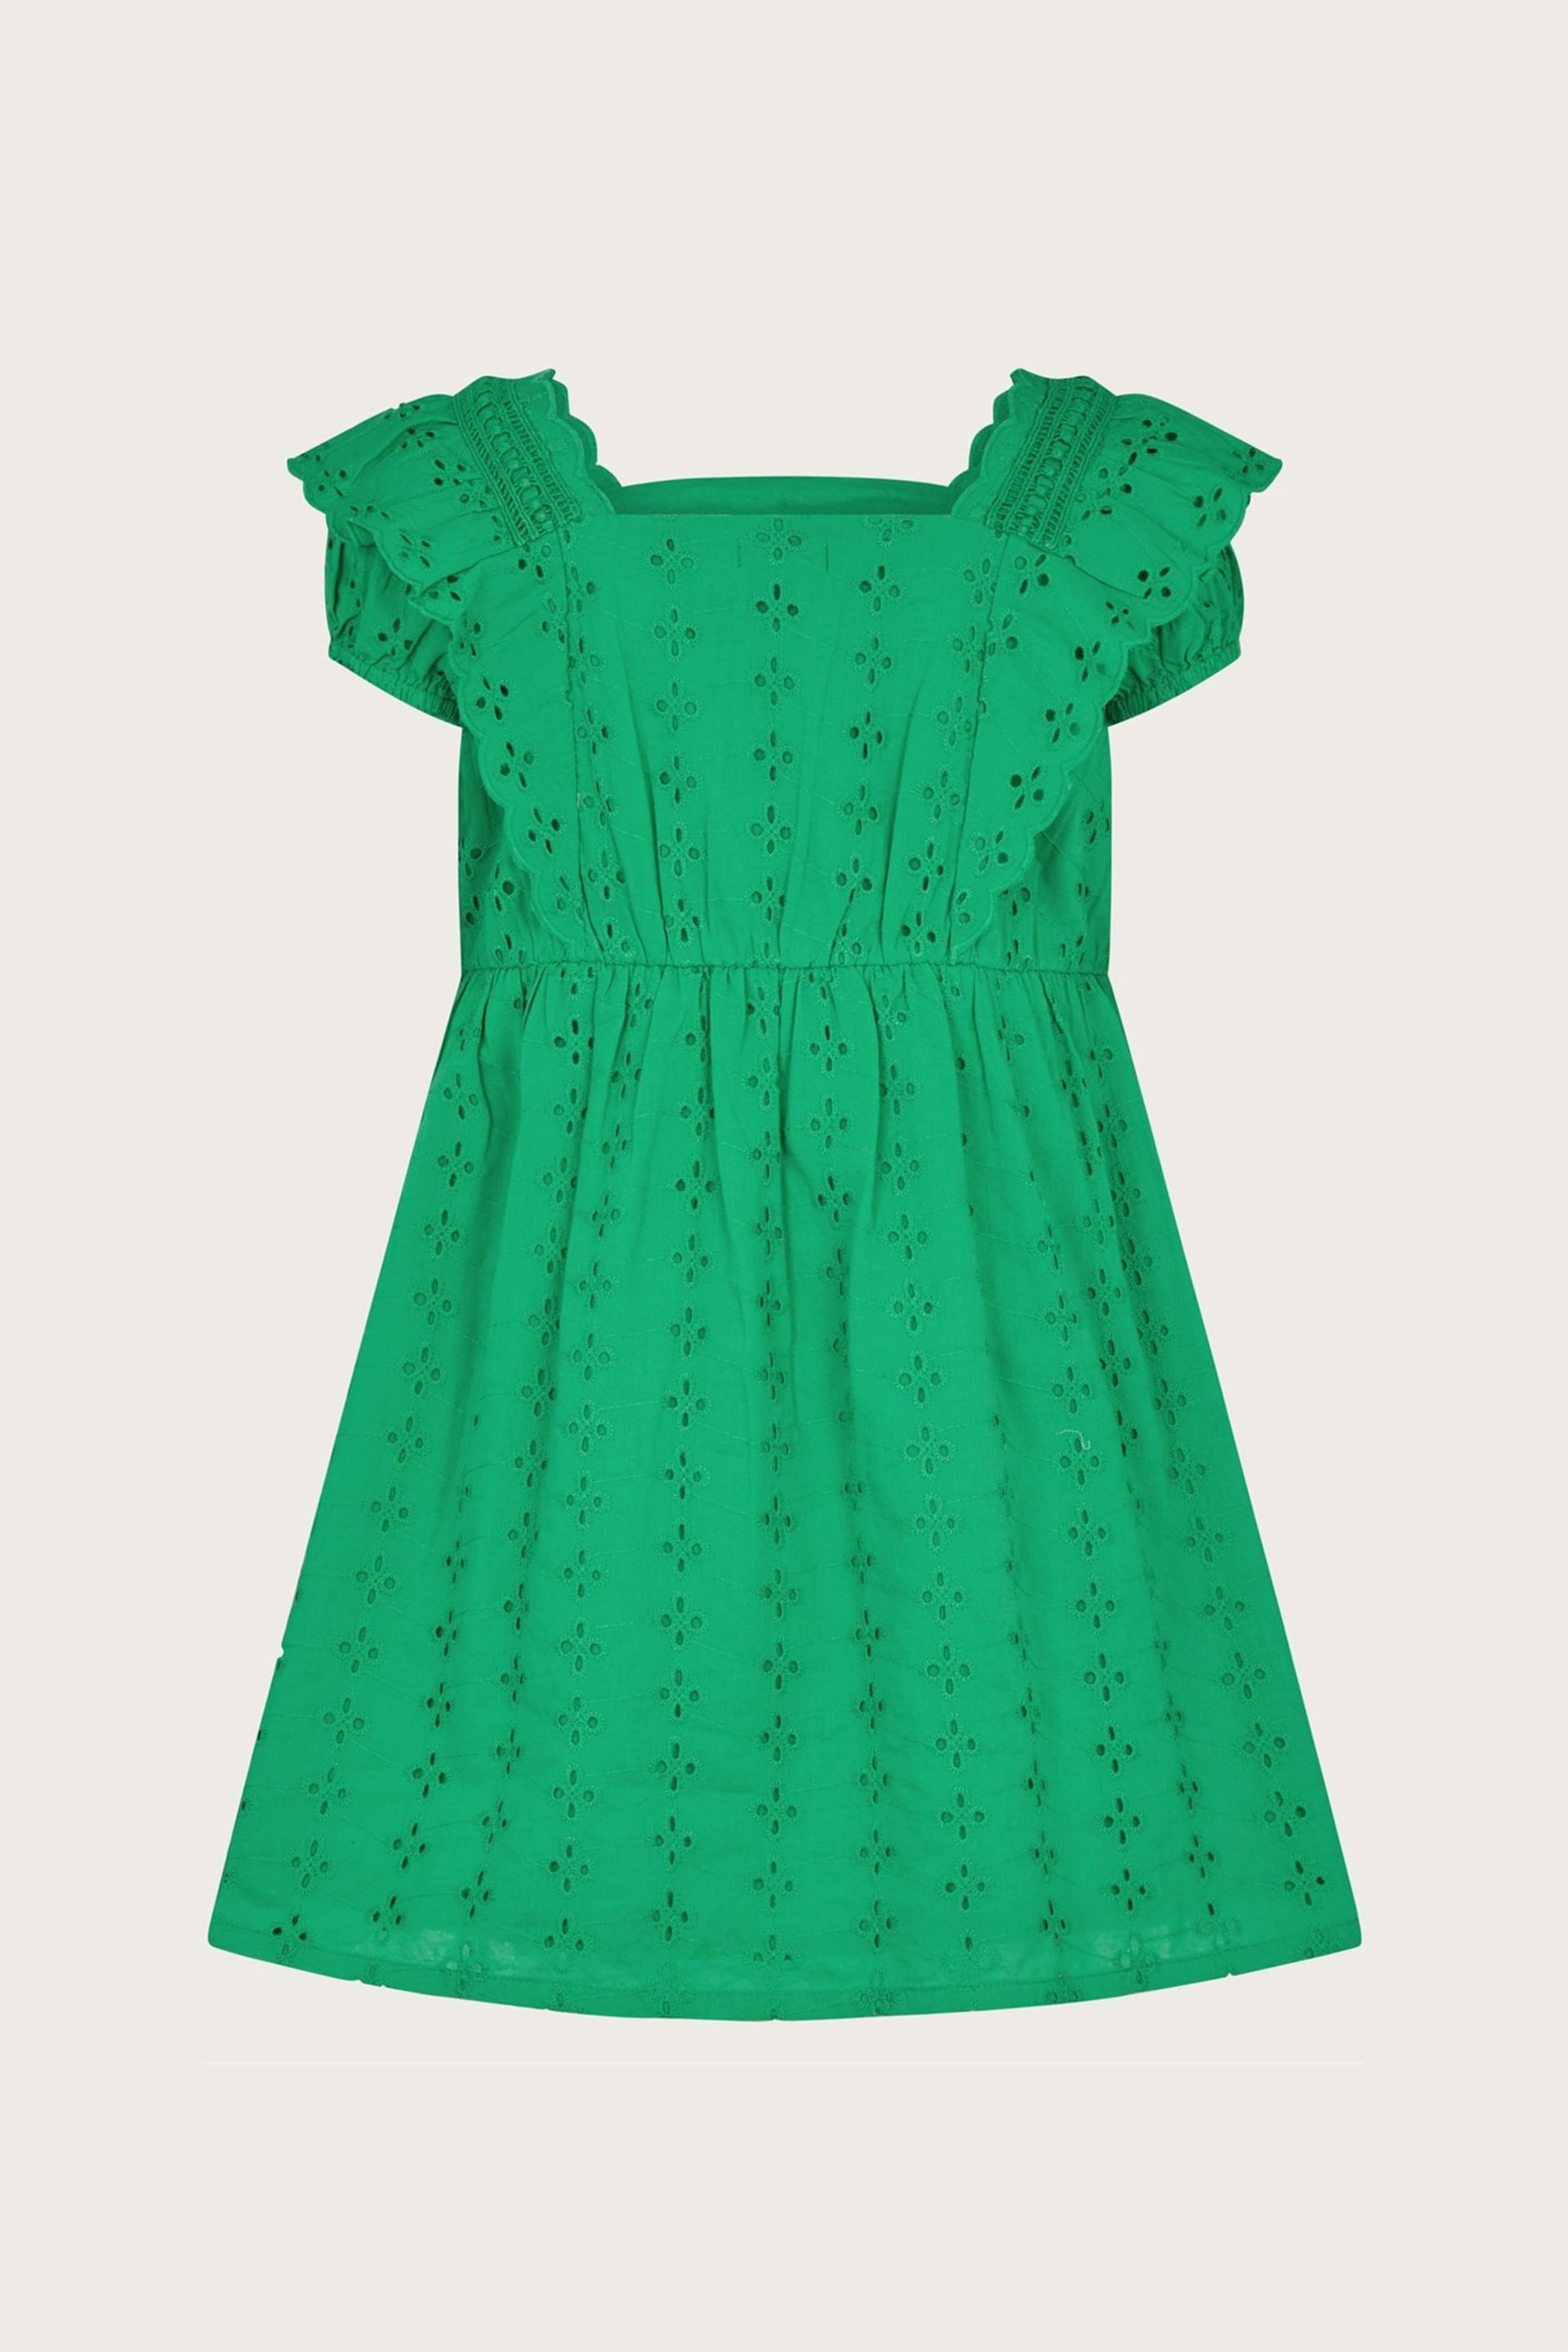 Monsoon Green Broderie Frill Dress - Image 2 of 3